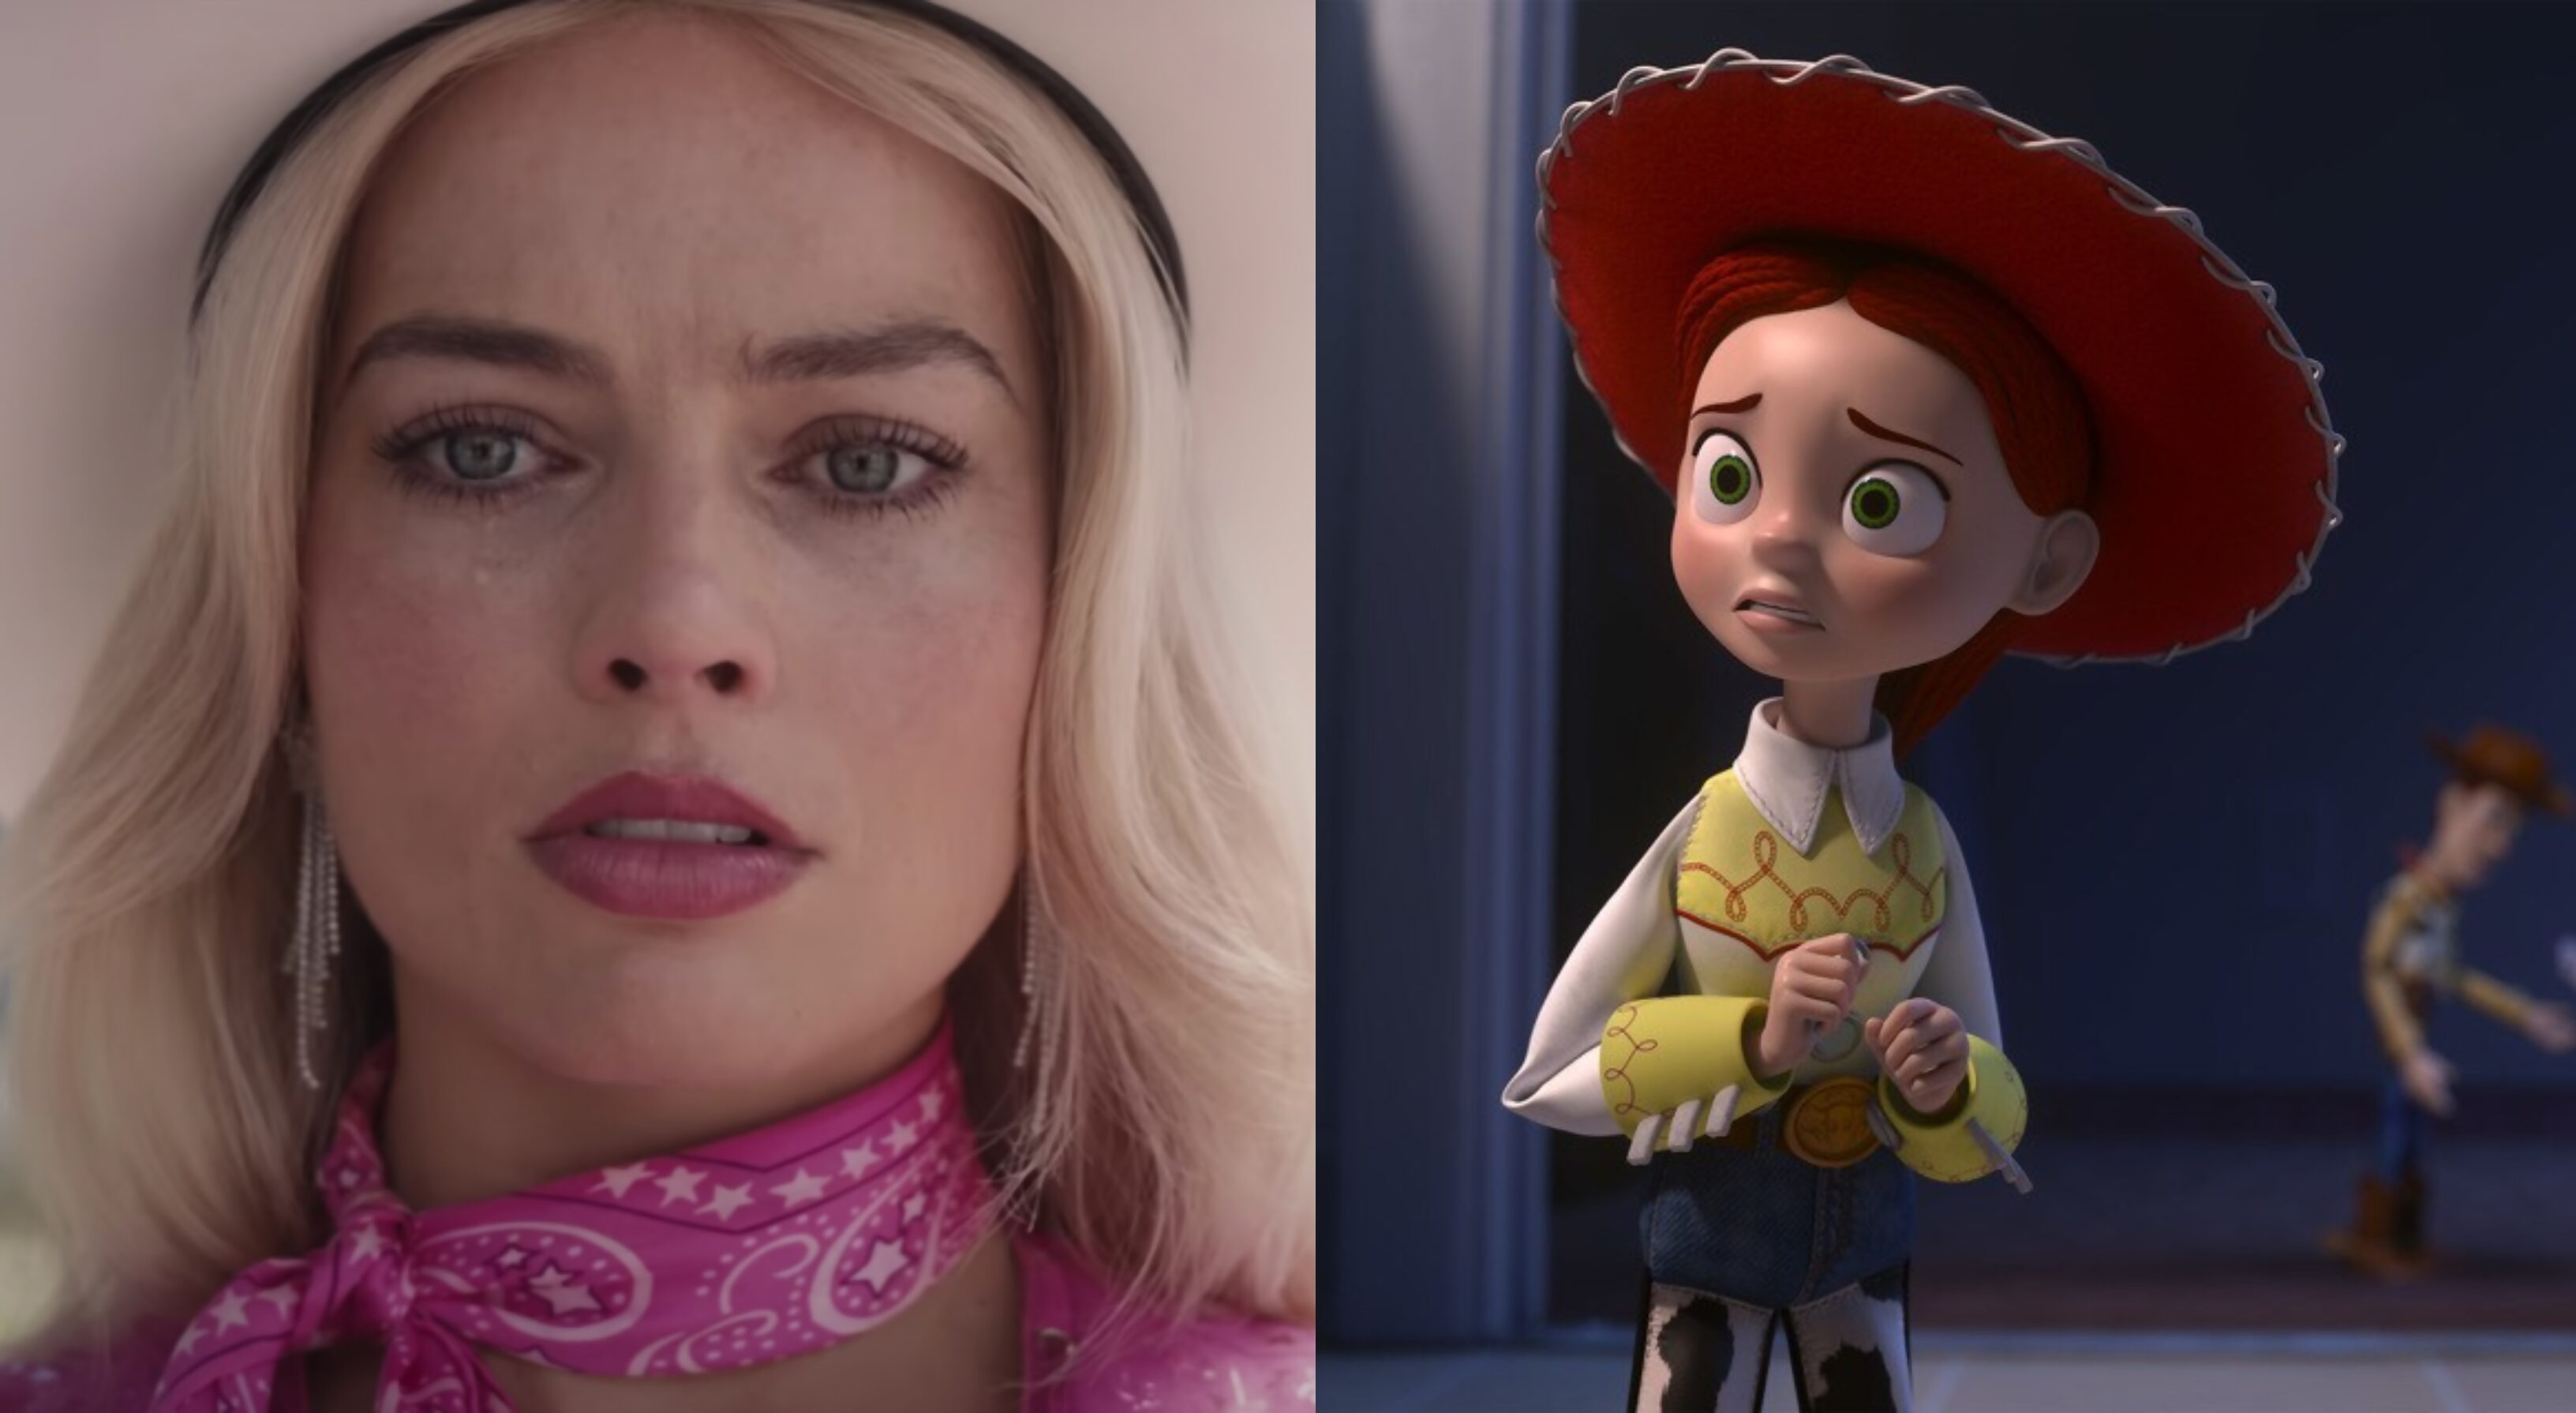 The beautiful bleakness of the Toy Story movies